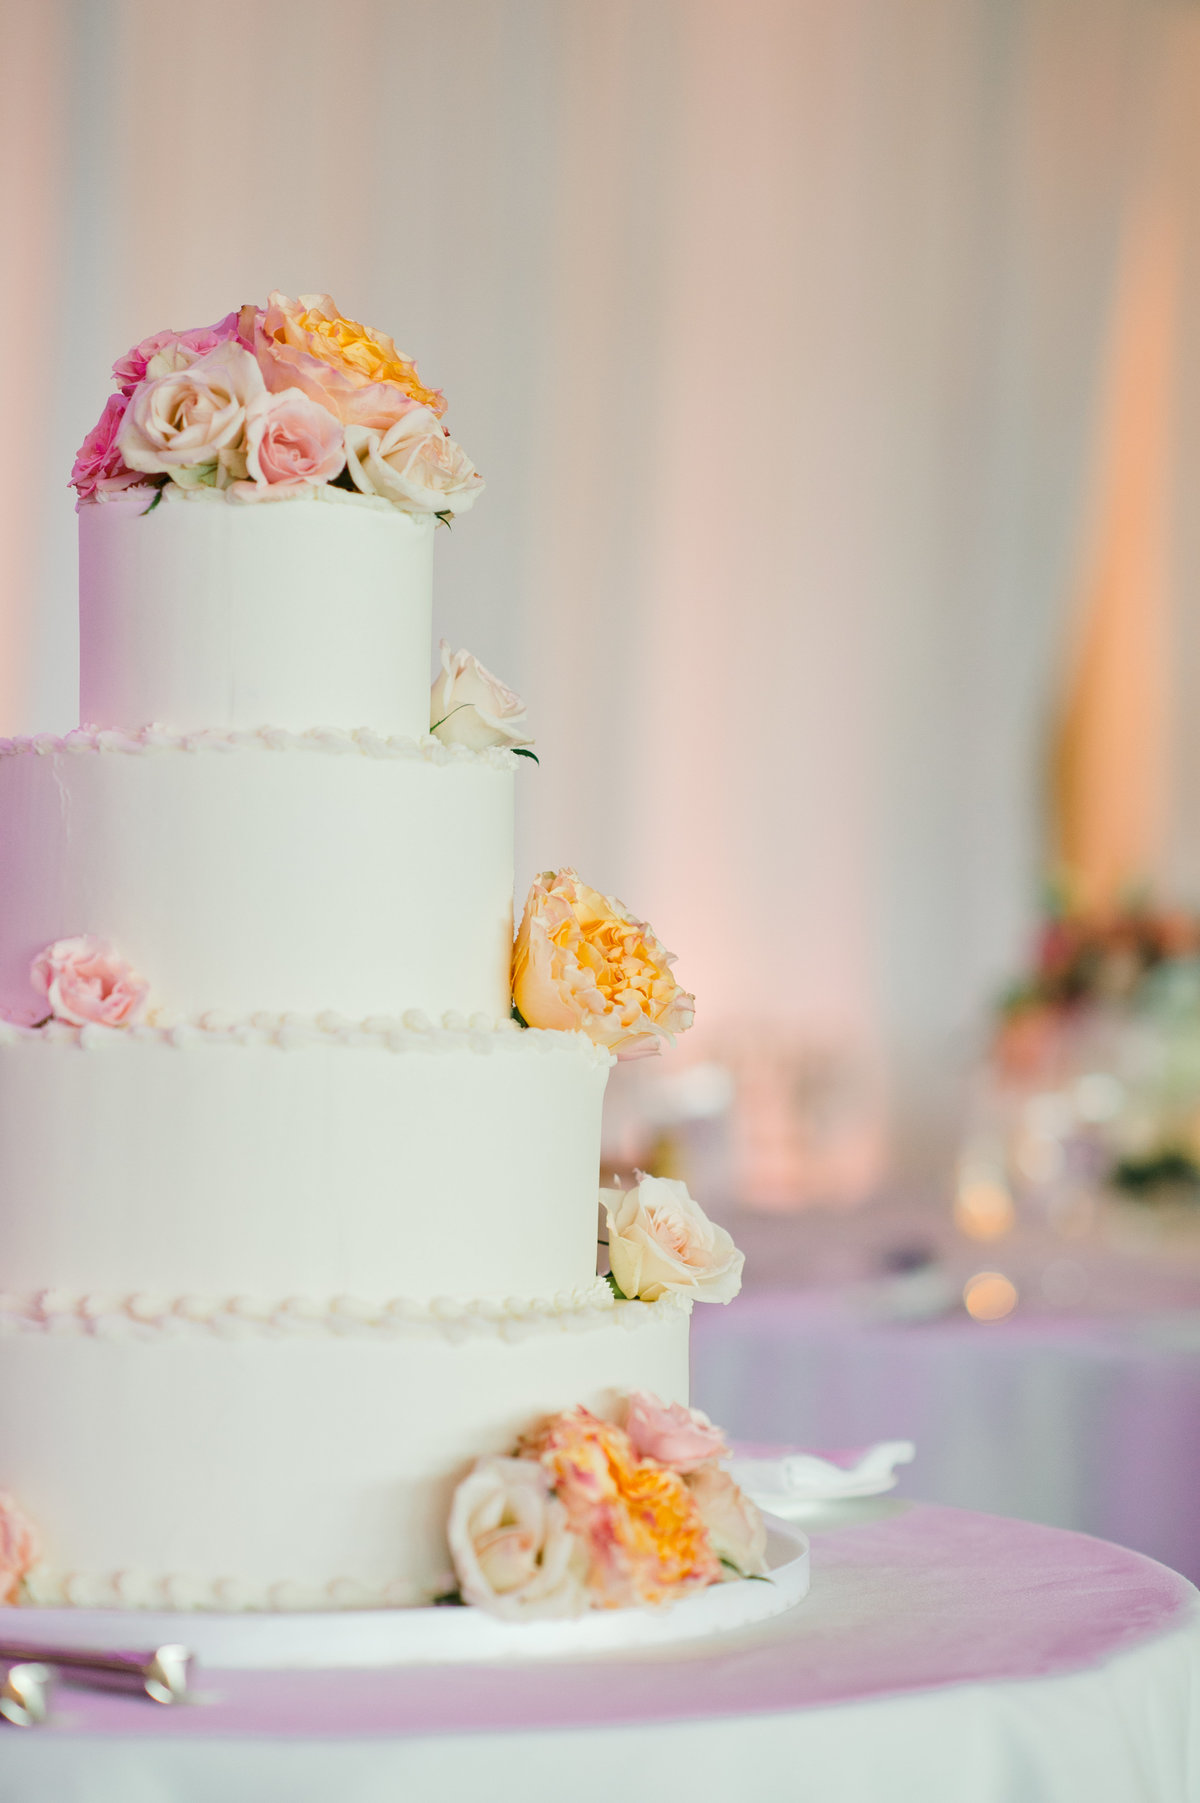 Cake with blush flowers